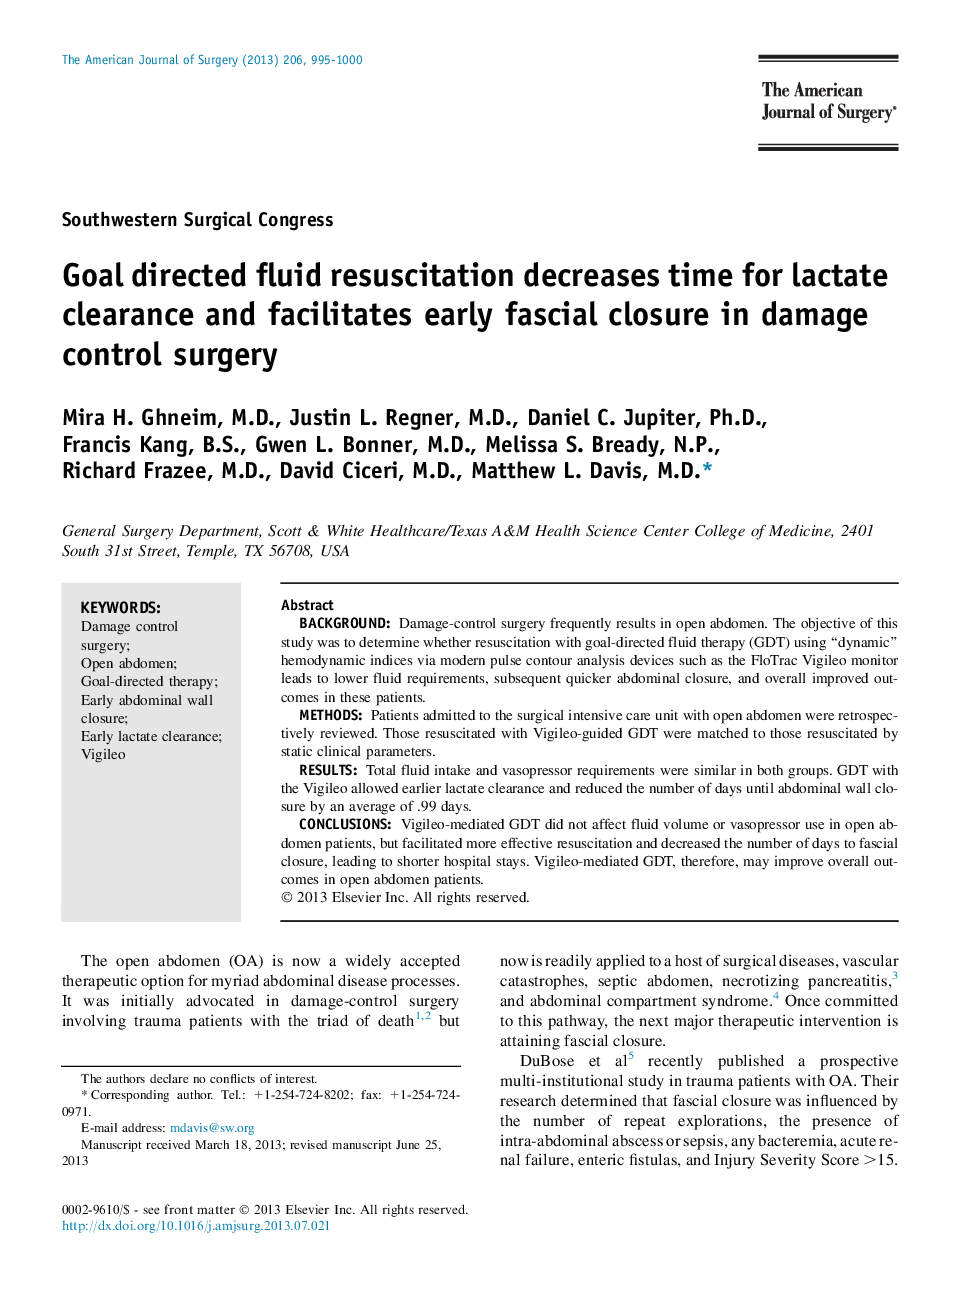 Goal directed fluid resuscitation decreases time for lactate clearance and facilitates early fascial closure in damage control surgery 